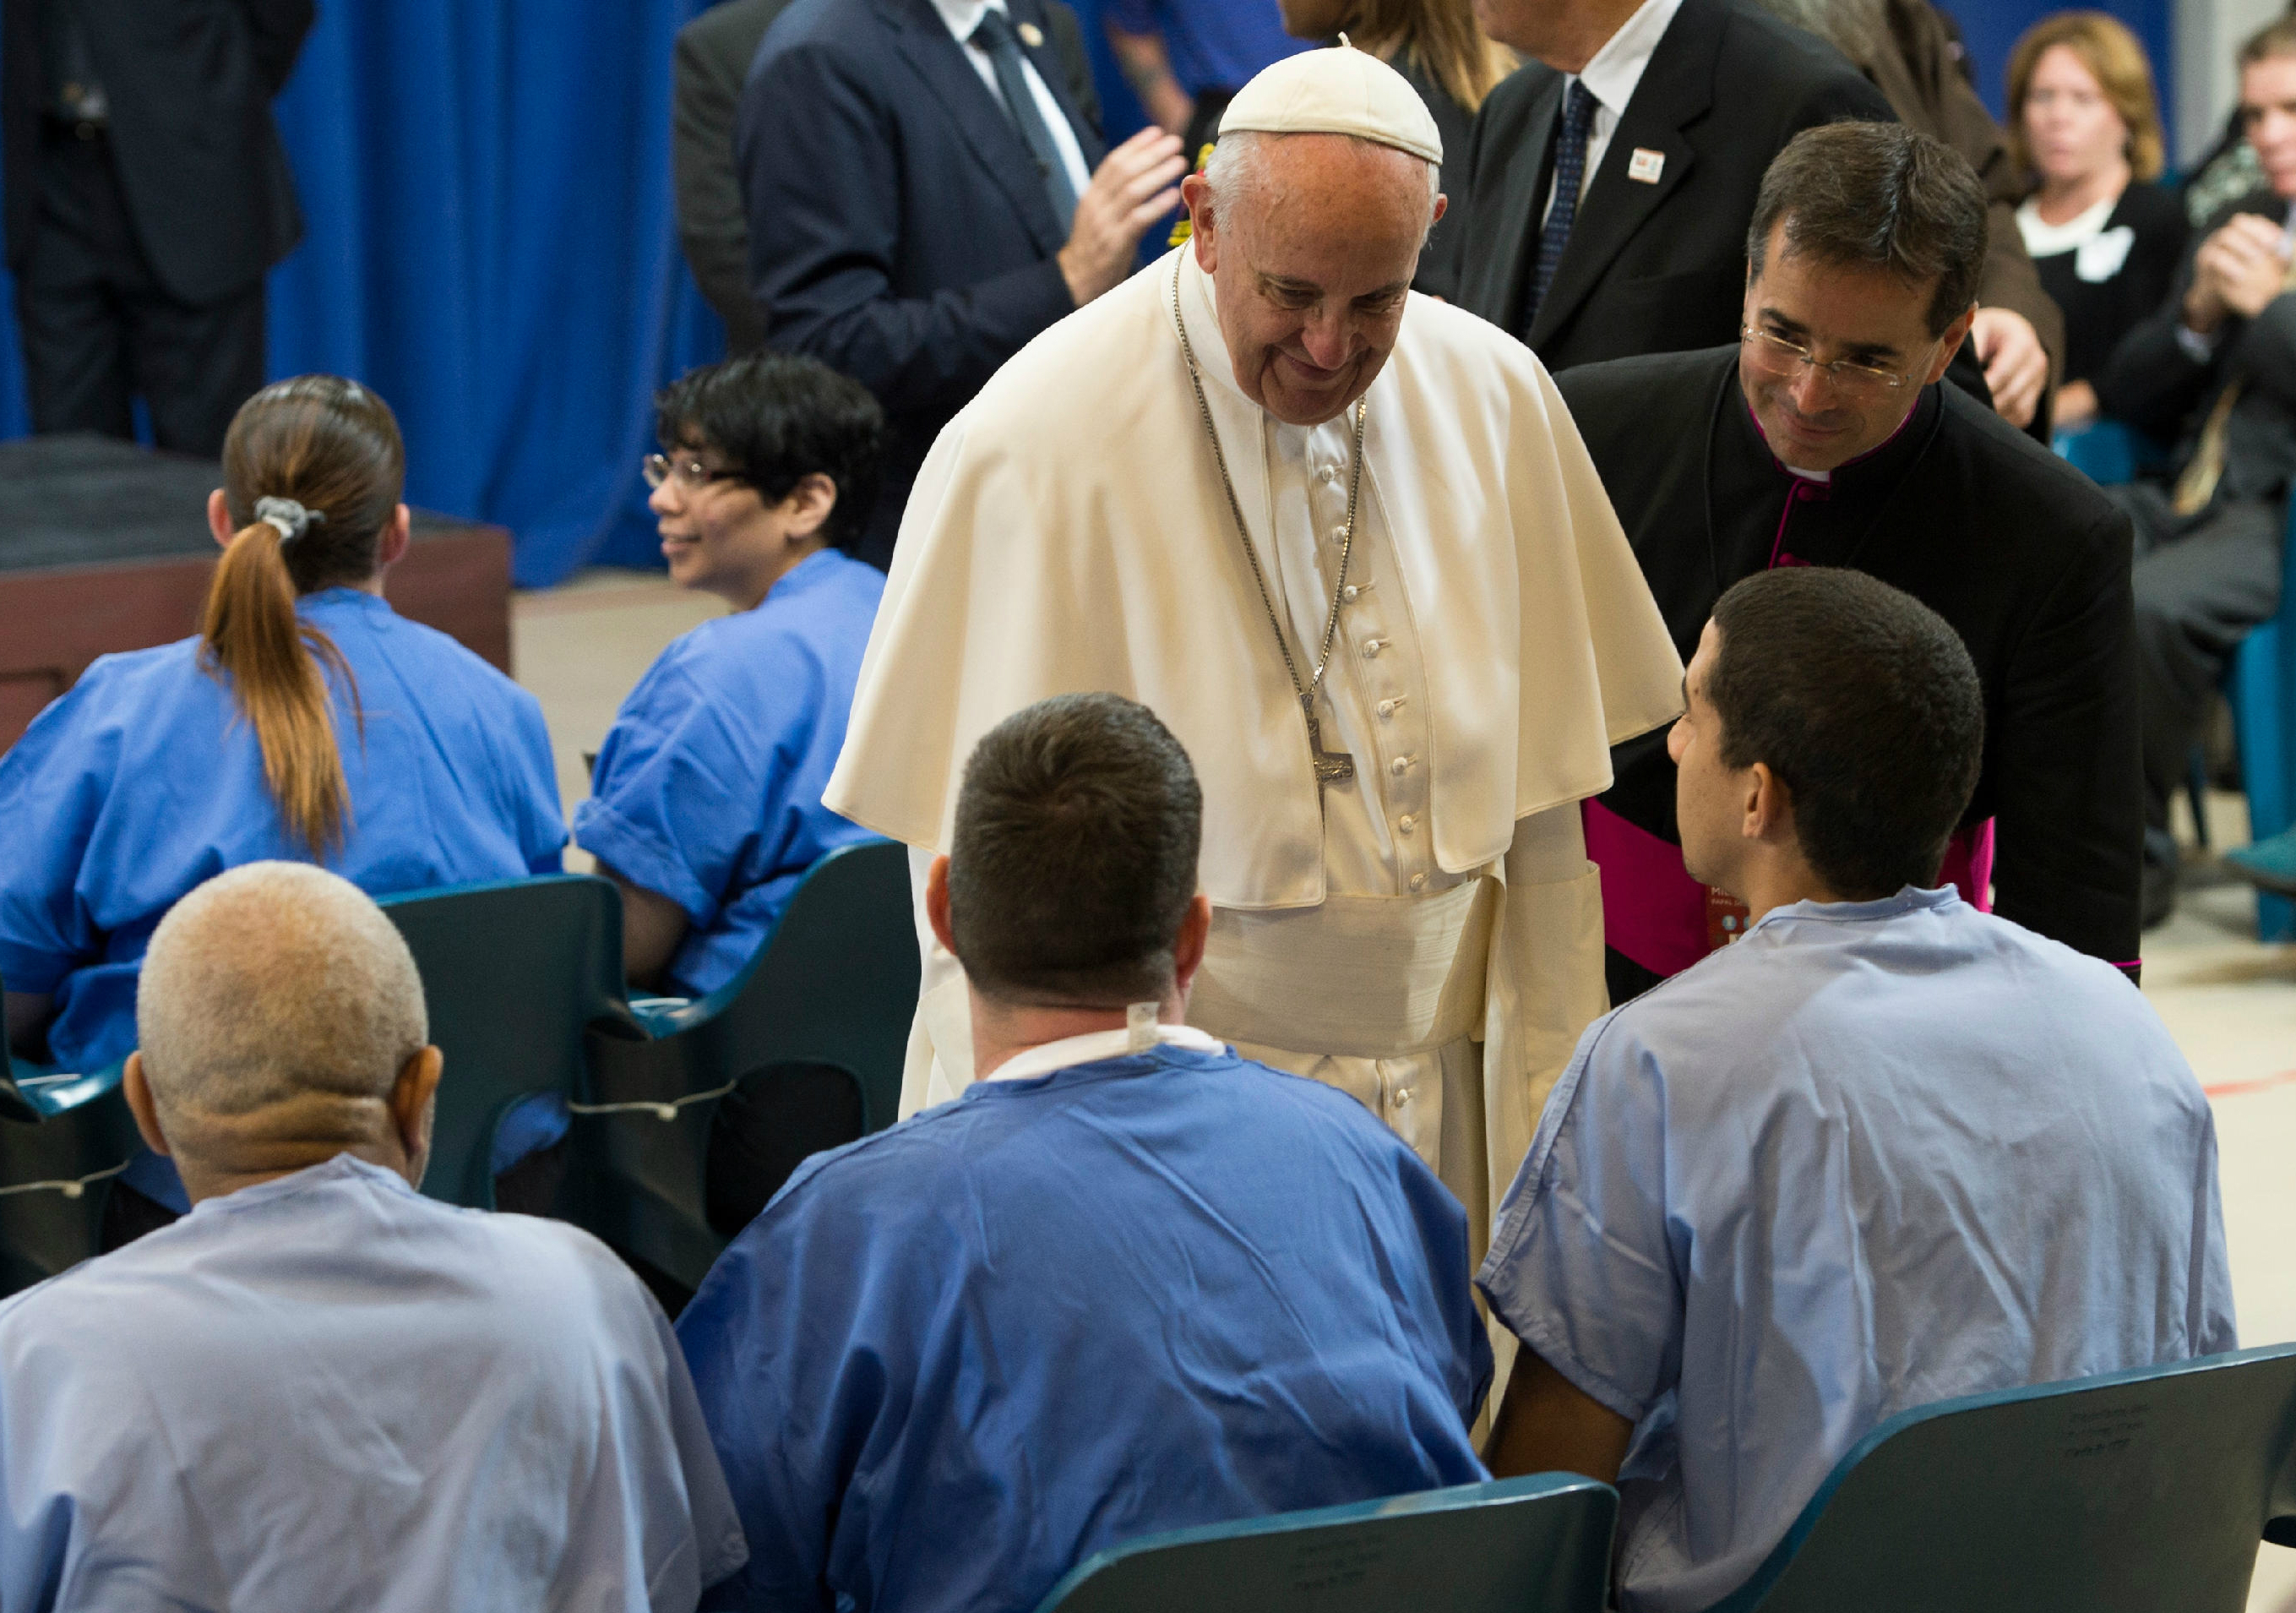 Pope Francis greets inmates at the Curran-Fromhold Correctional Facility of Philadelphia